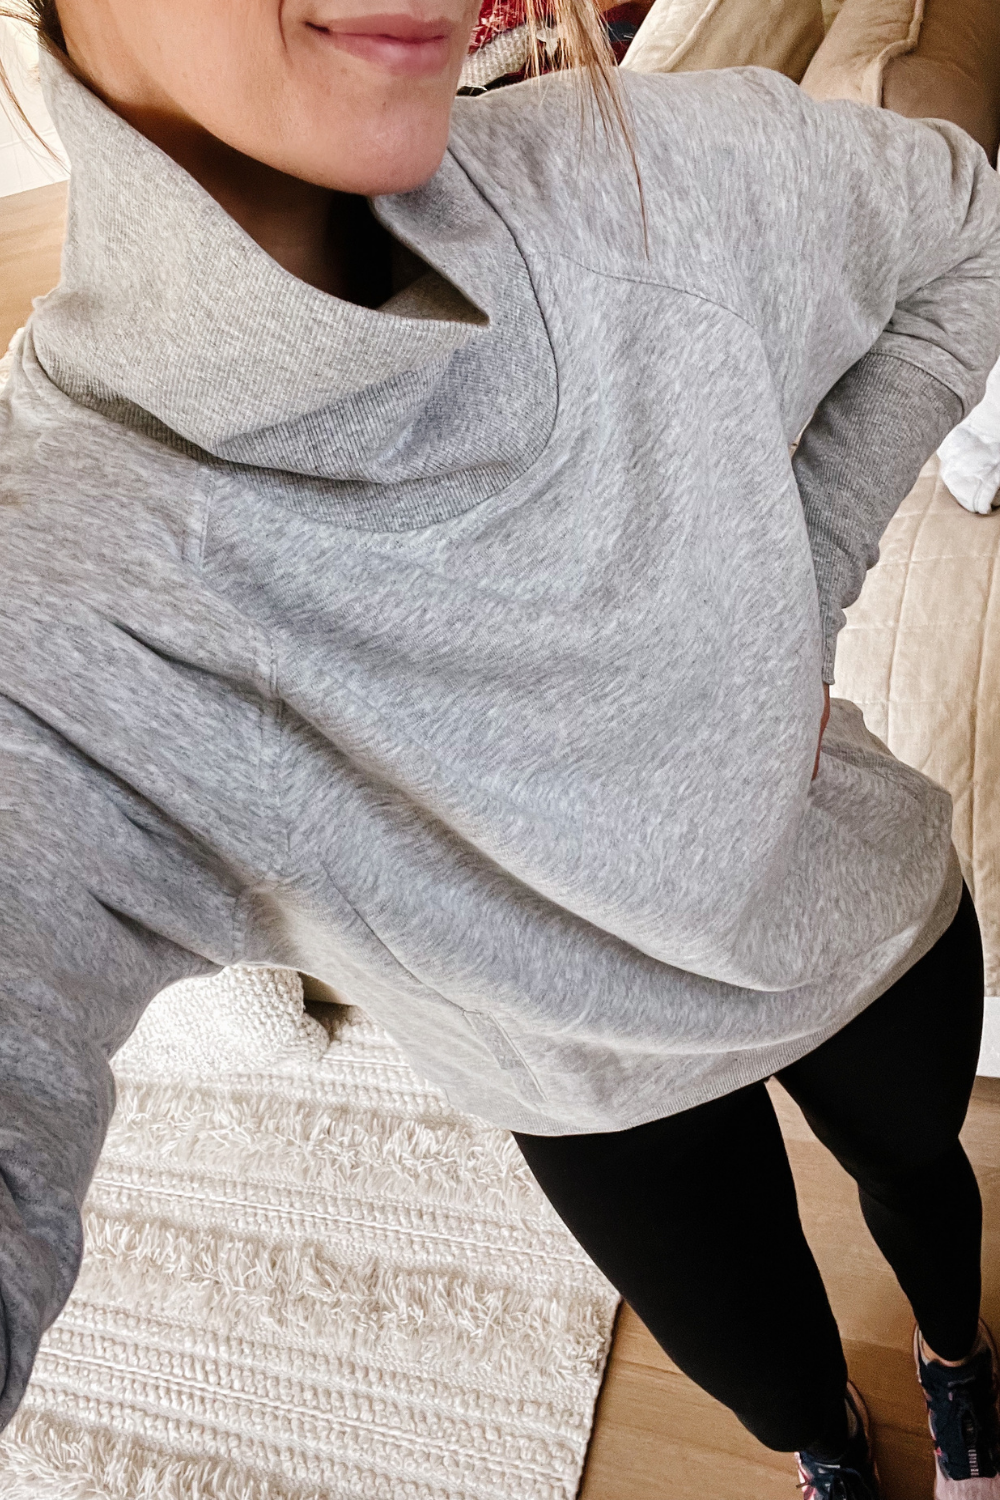 Suzanne wearing a grey pullover and leggings